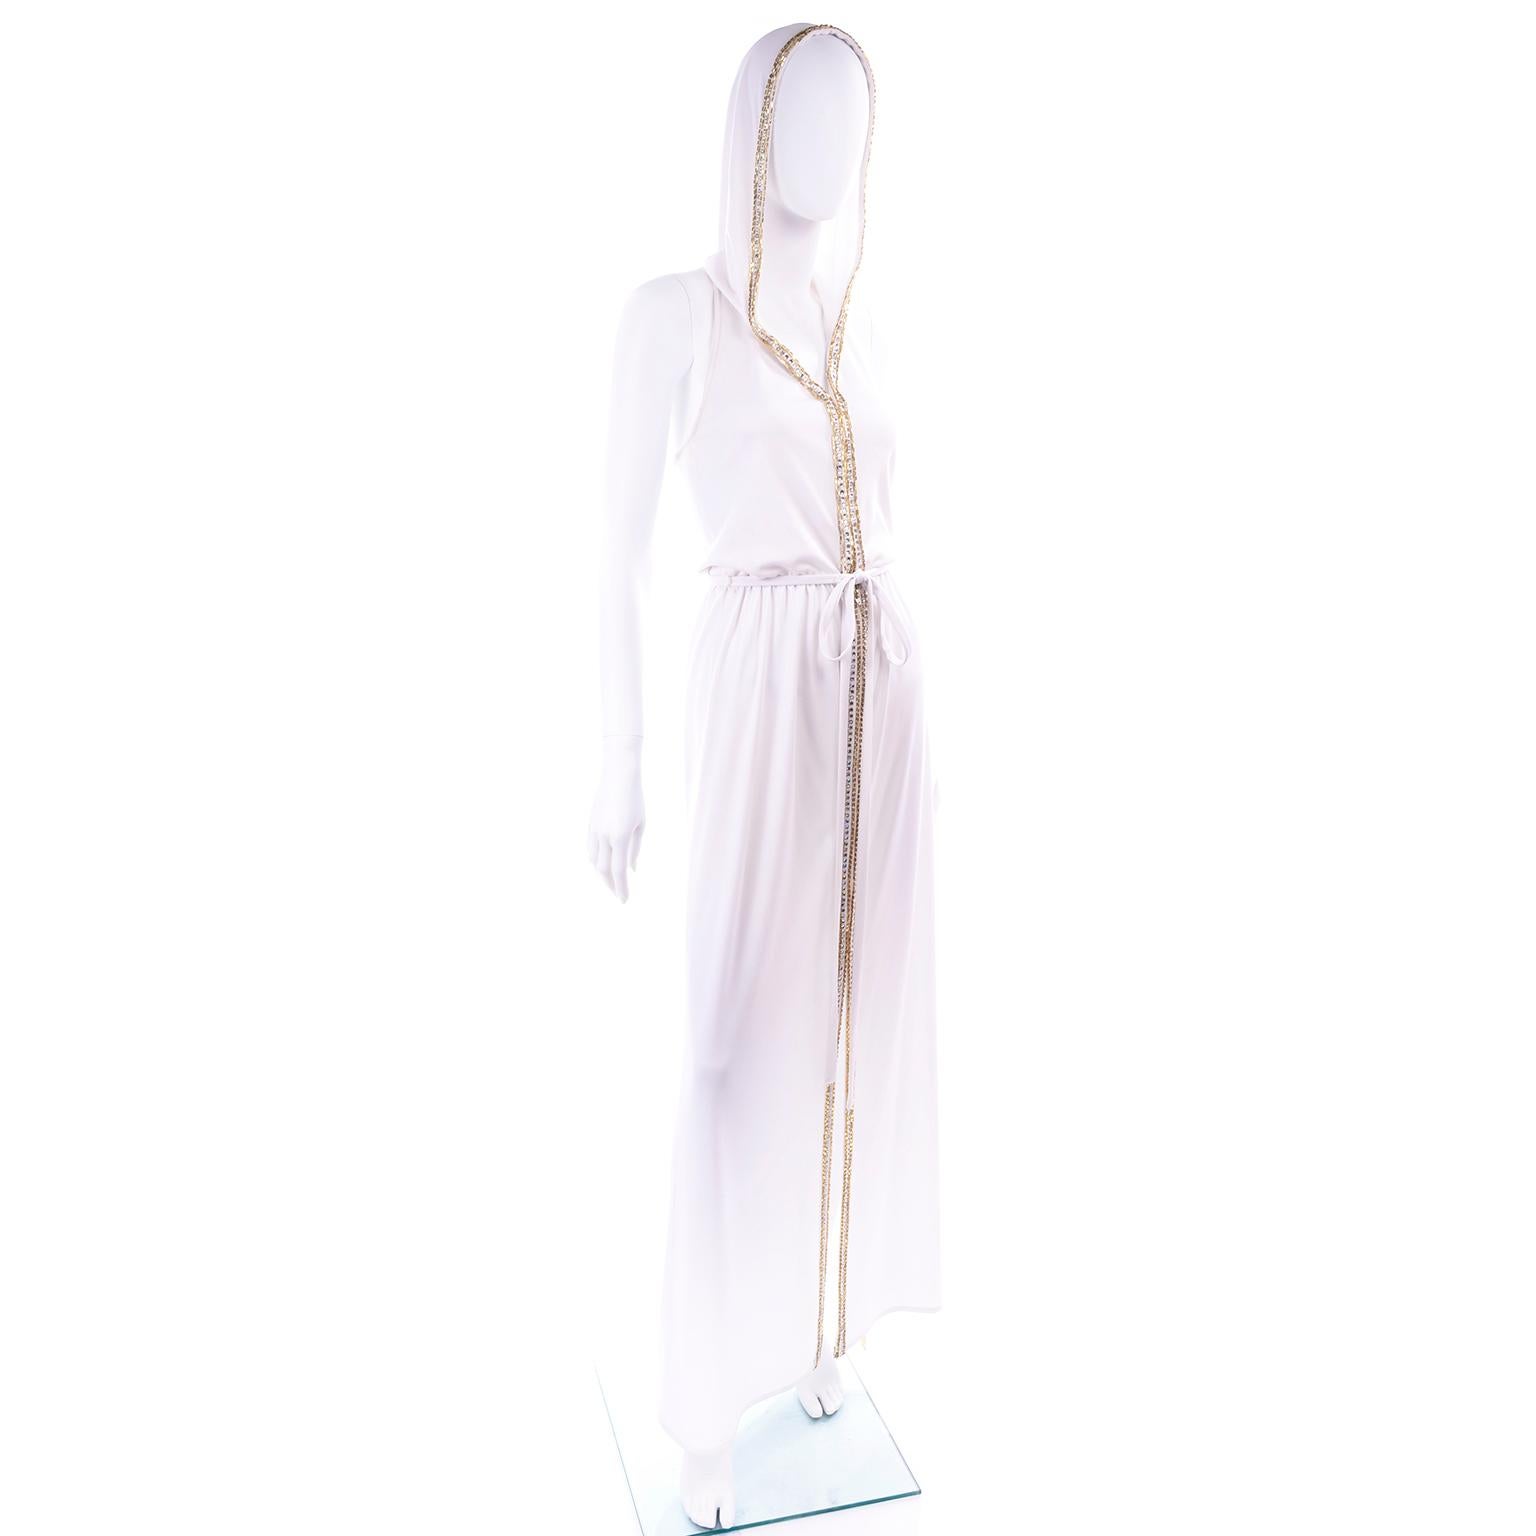 We fell in love with this vintage 70's maxi dress when we found it!  This 1970's full length white jersey vintage dress is trimmed with rhinestones and gold beads and the best part - it has a hood!  The dress zips up the front and has a high slit up